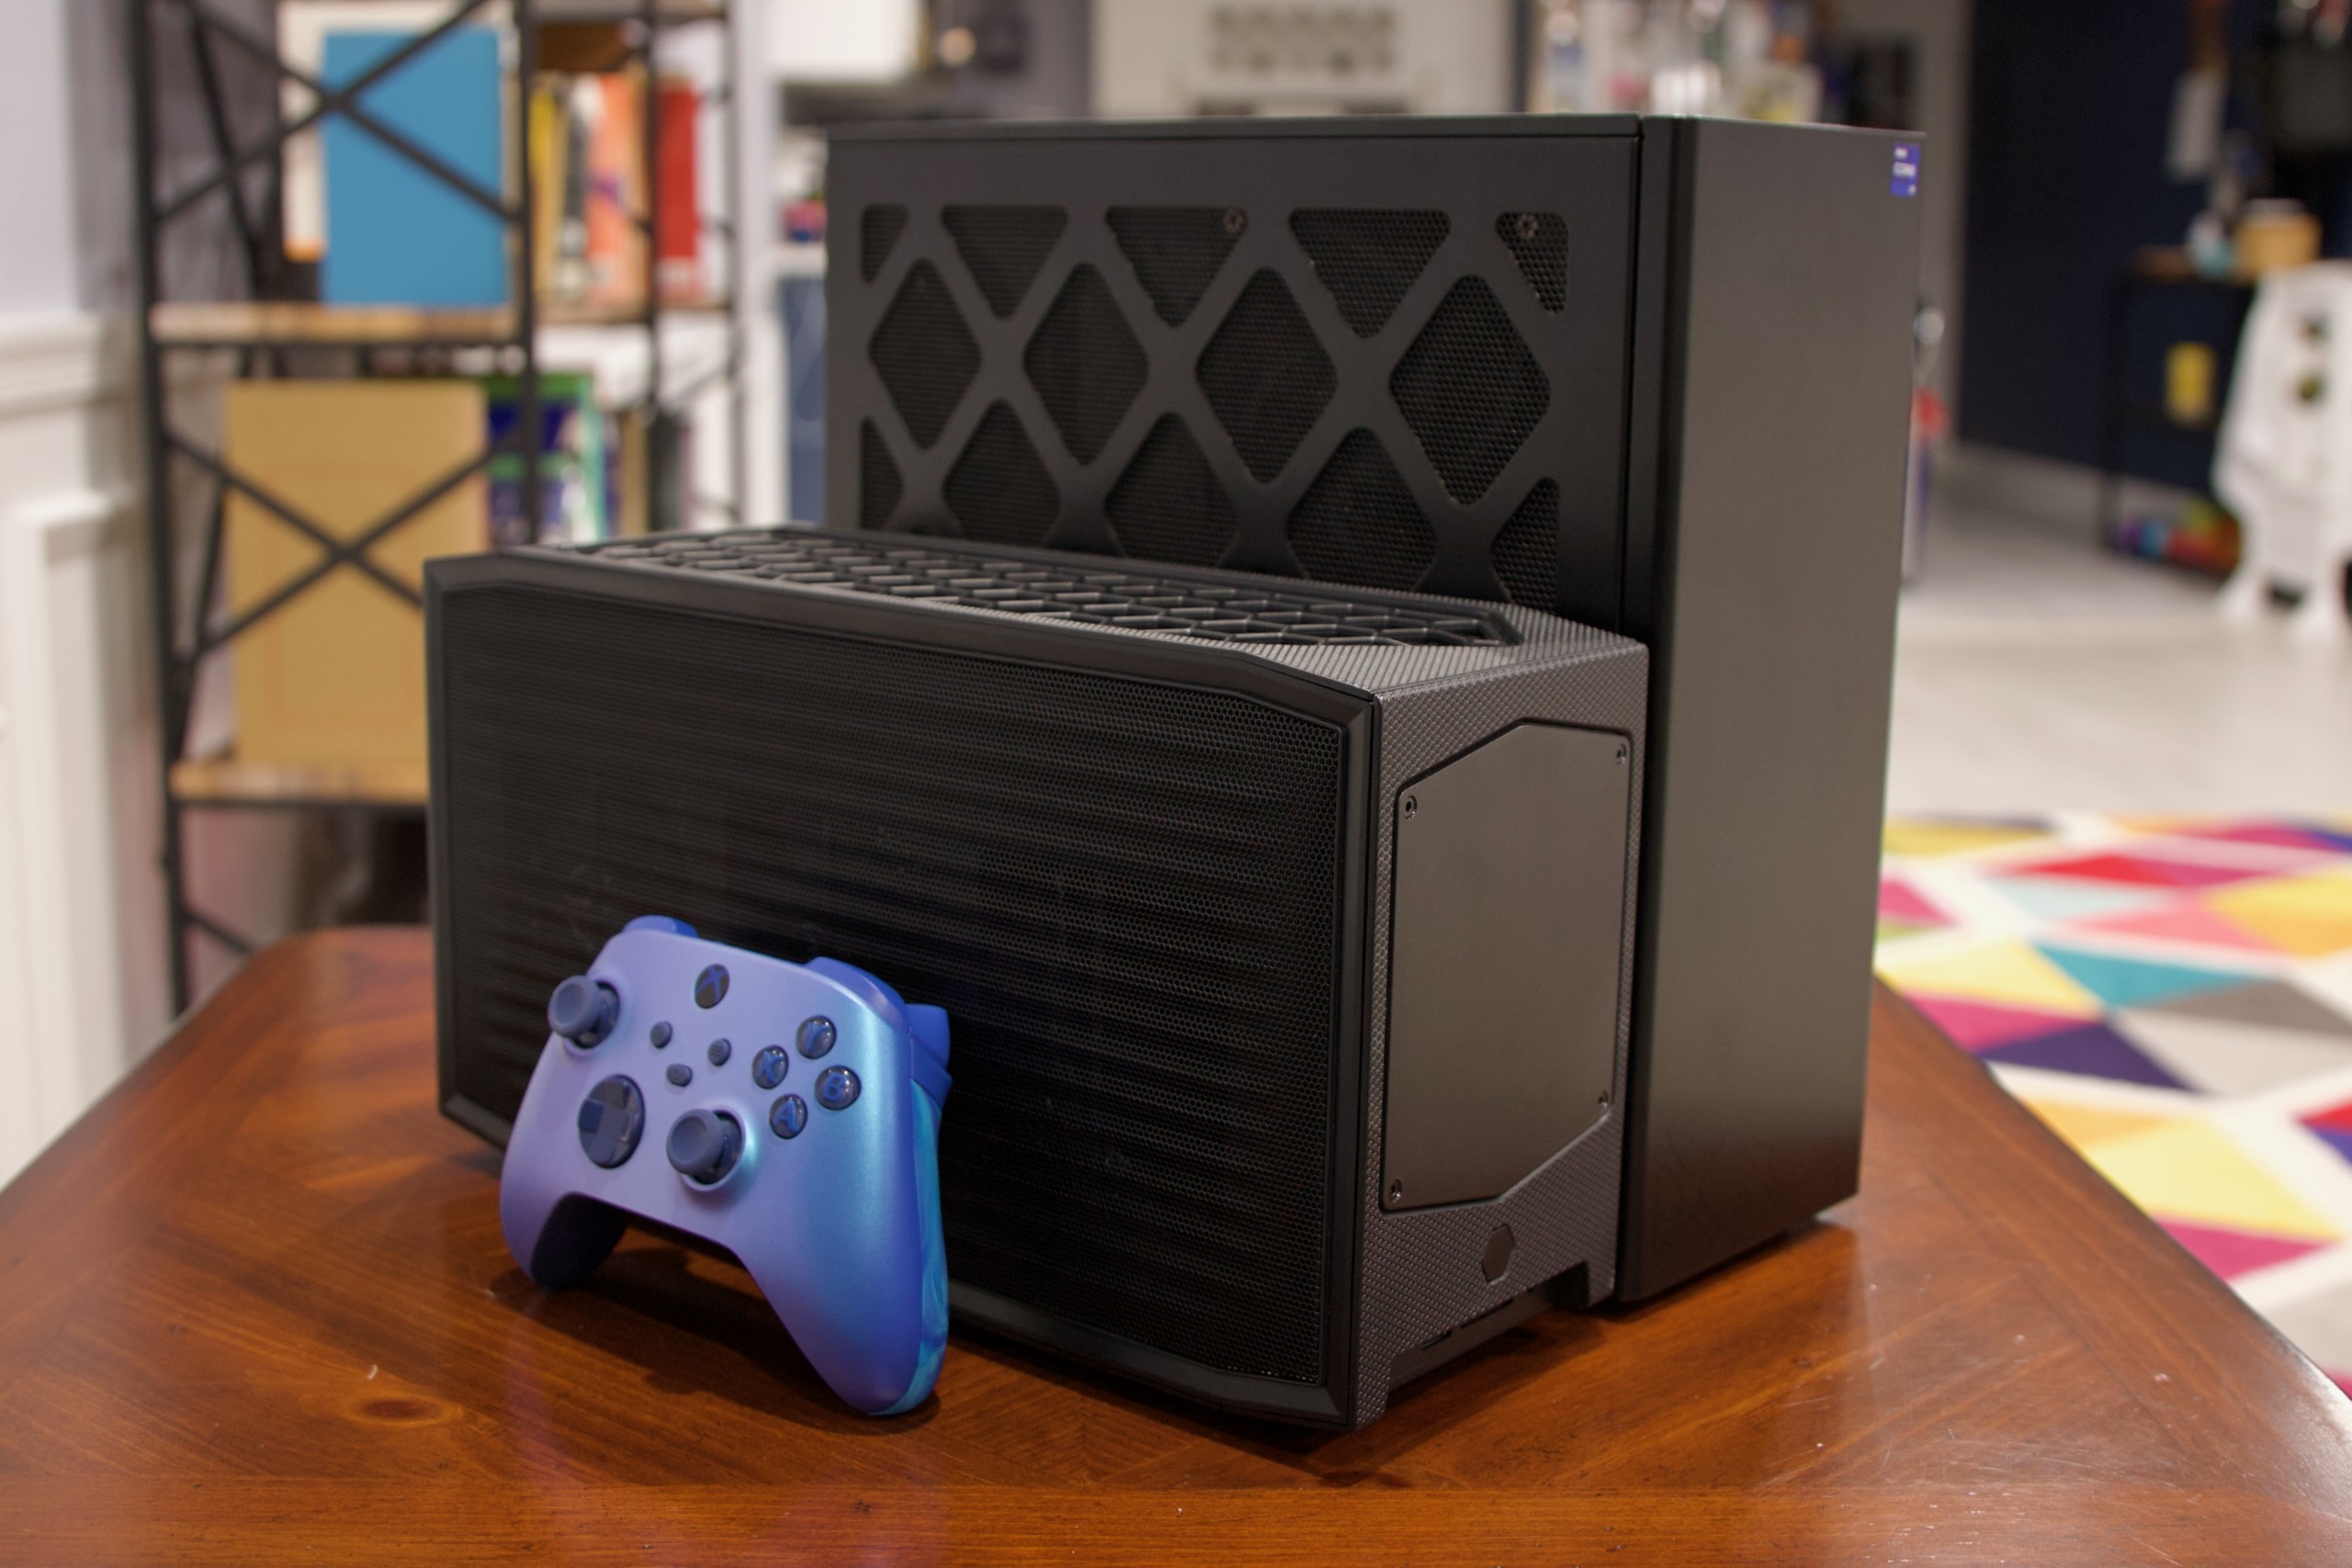 This new mini-PC console is smaller than an Xbox Series S and